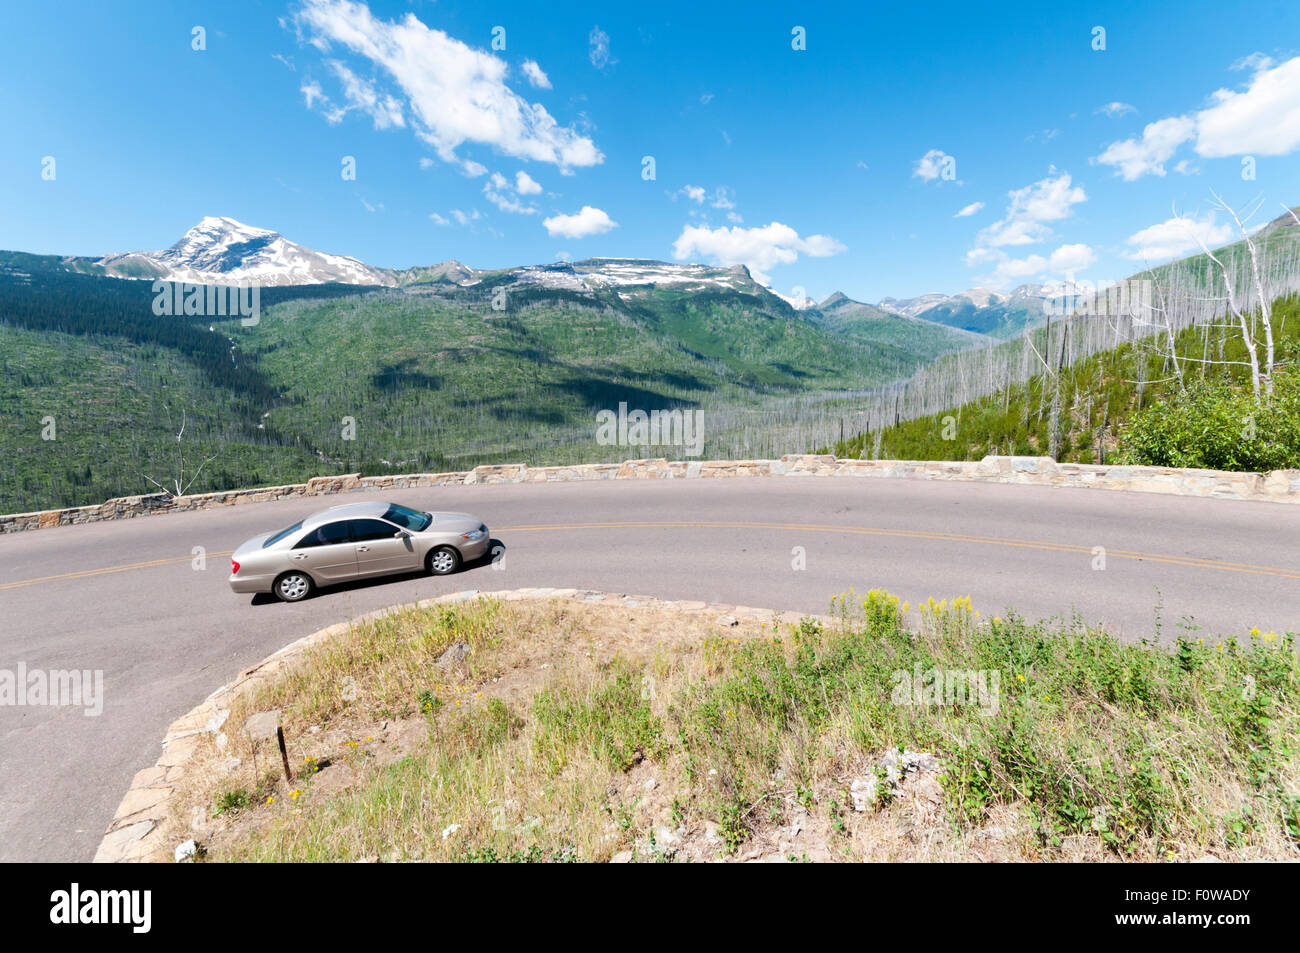 A car rounding The Loop, the only hairpin bend on the Going-to-the-Sun Road in Glacier National Park, Montana, USA. Stock Photo